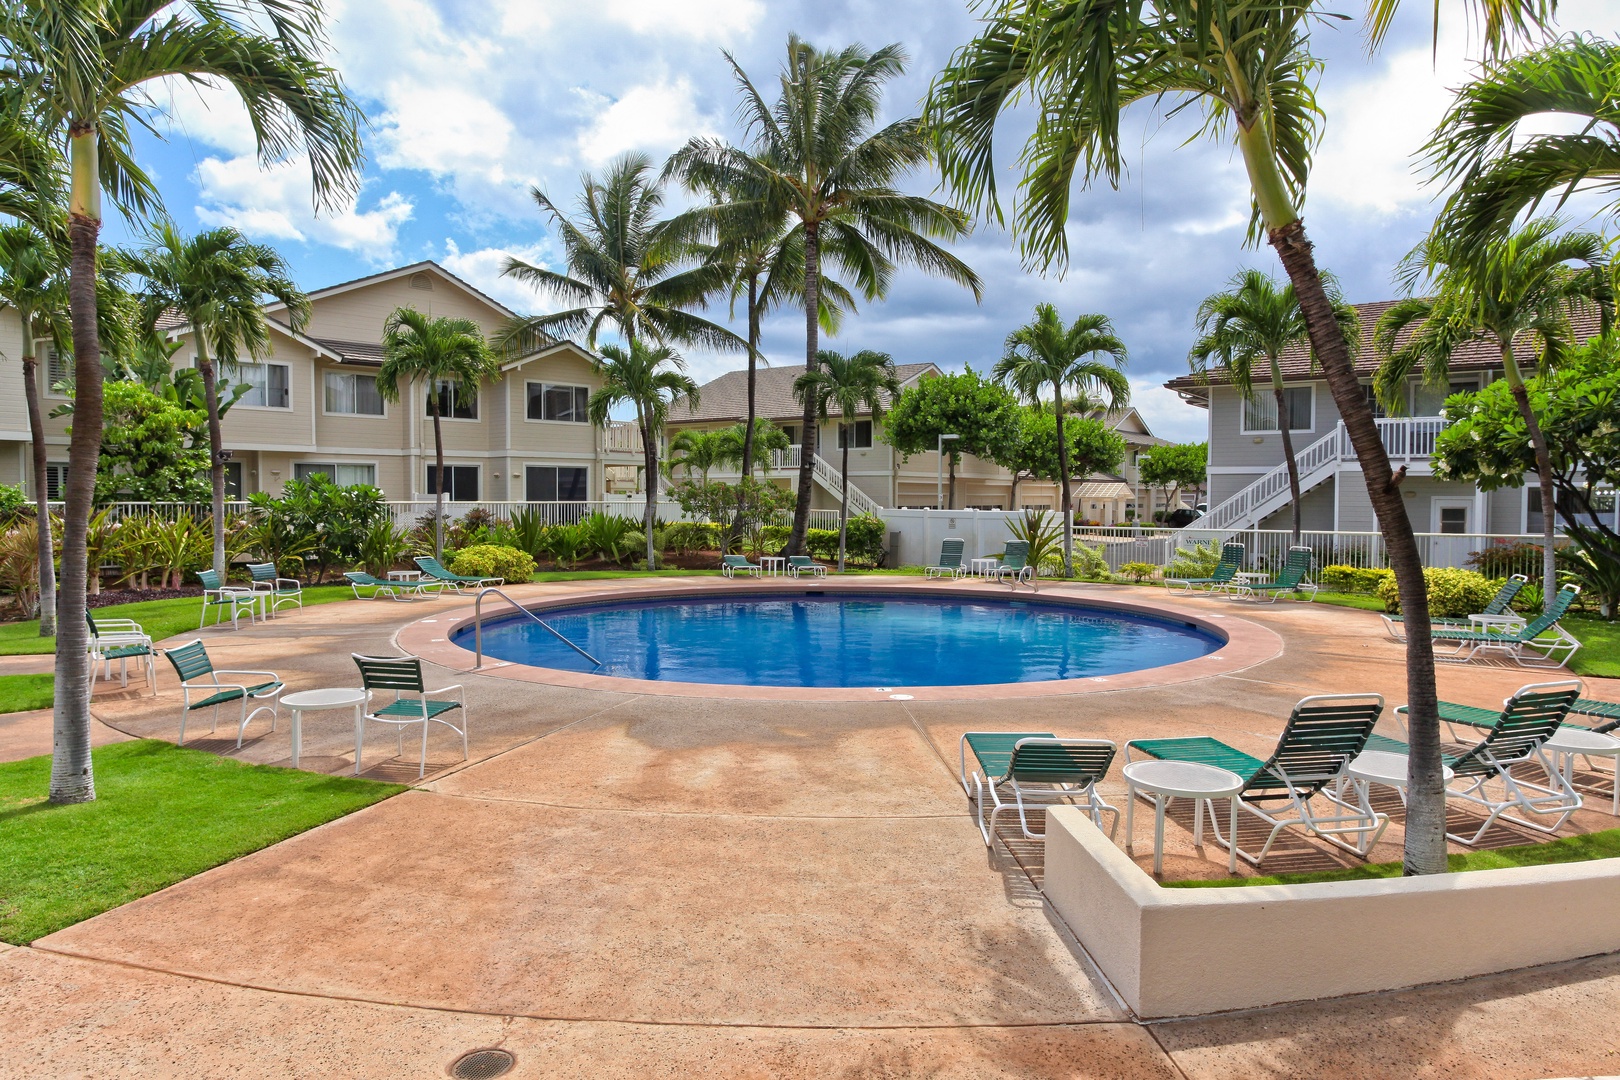 Kapolei Vacation Rentals, Fairways at Ko Olina 18C - Go for a swim in the sparkling waters and rest in the lounge chairs.